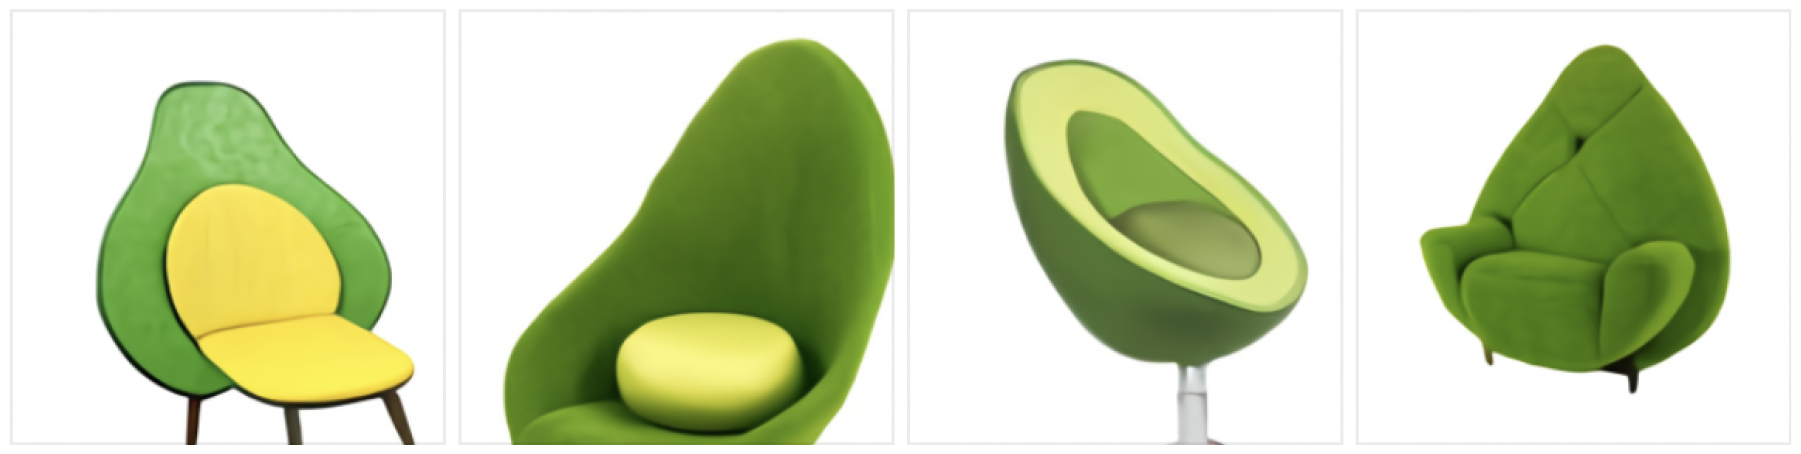 Four alternatives of armchairs in avocado shape generated with DALL·E.